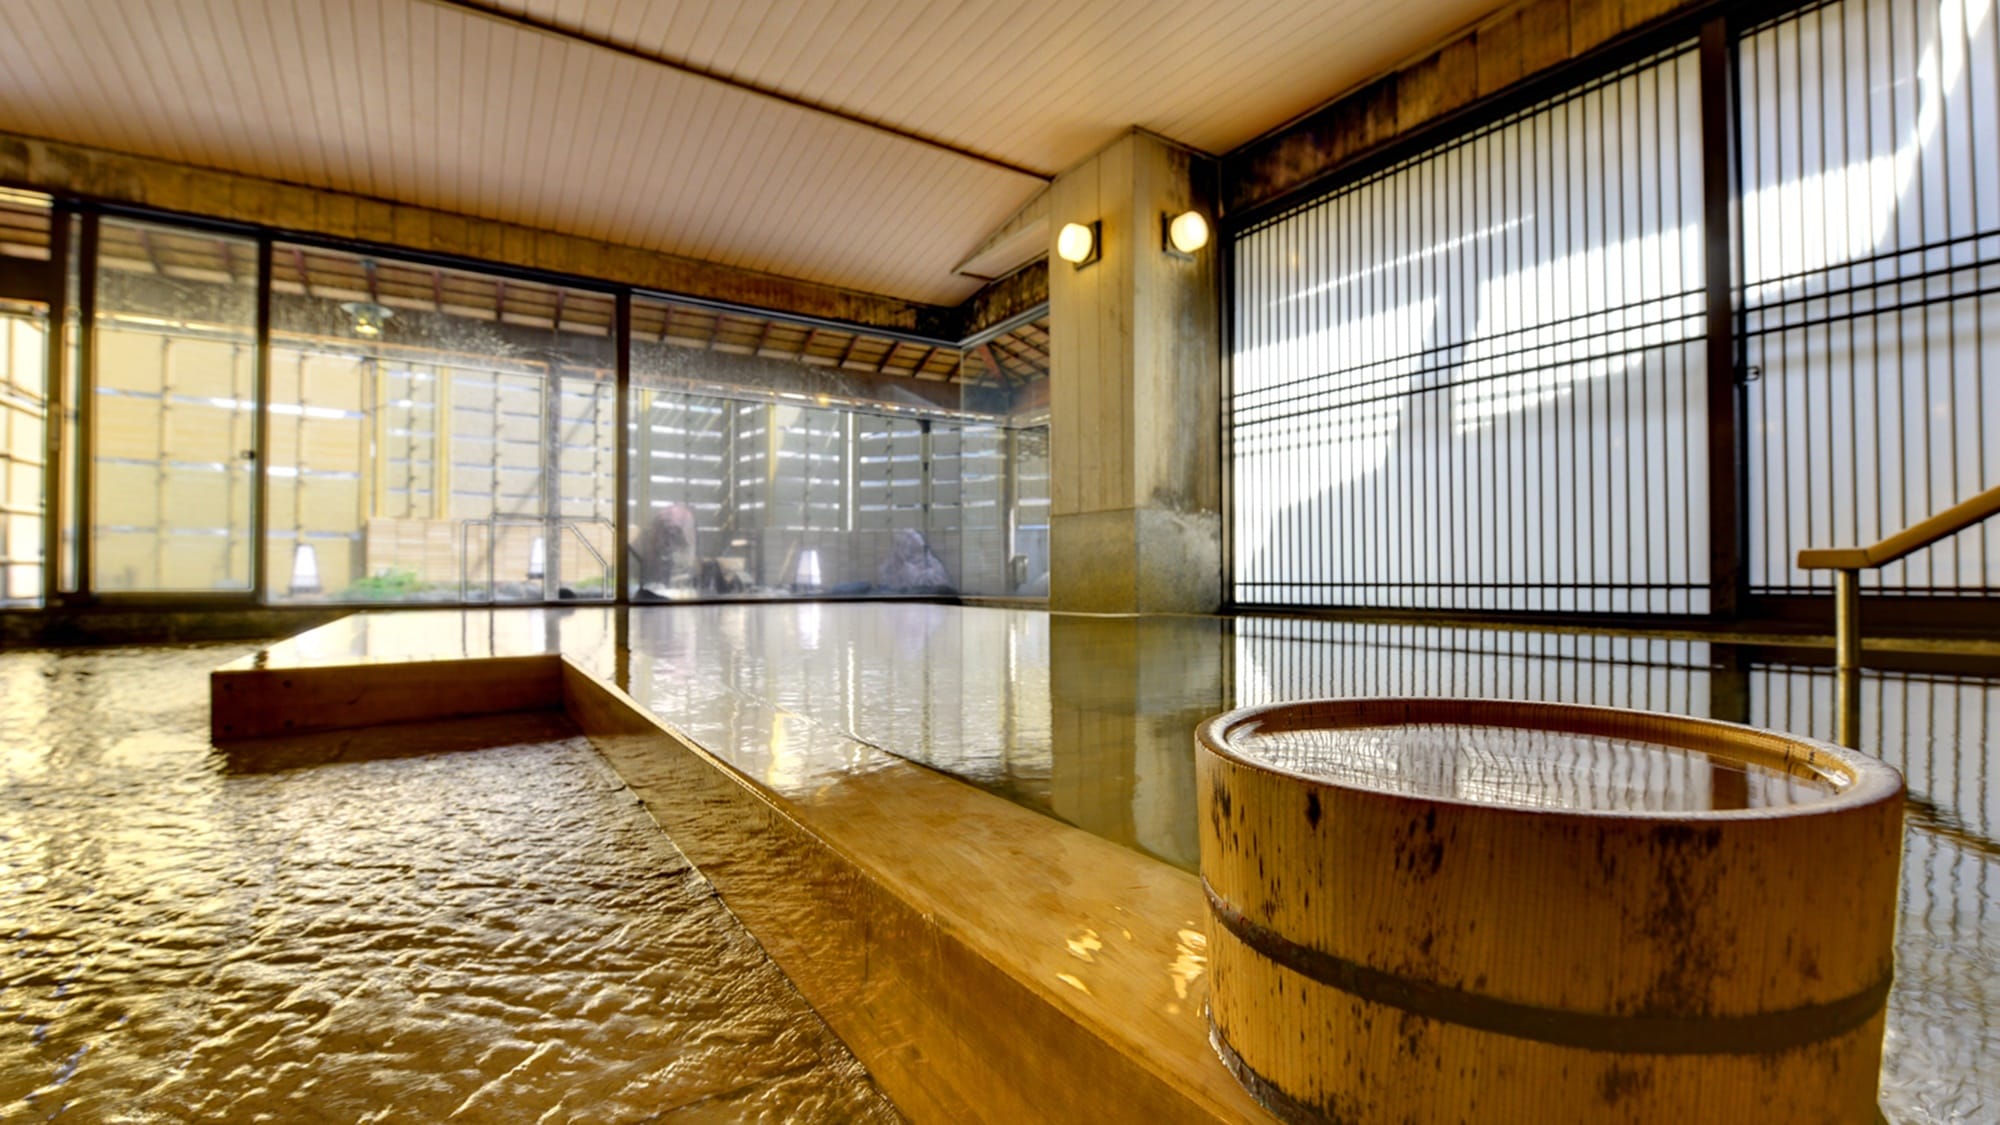 * The hotel owns a high temperature private source. It is not hydrated or mechanically heated. You can enjoy a very fresh hot spring